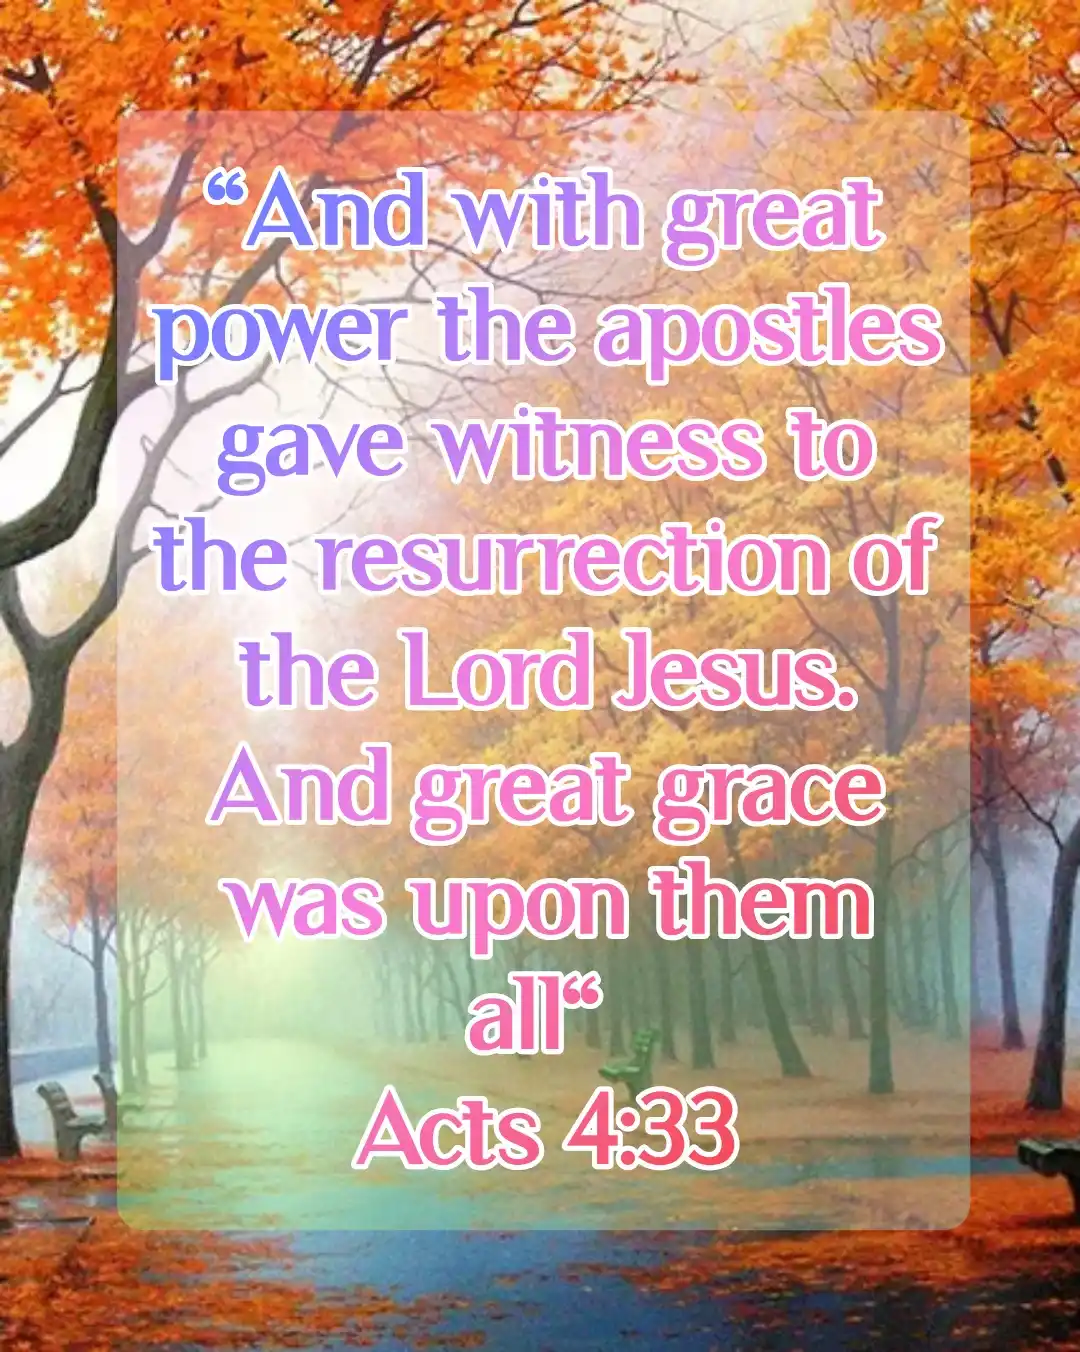 Bible Verses For Resurrection (Acts 4:33)